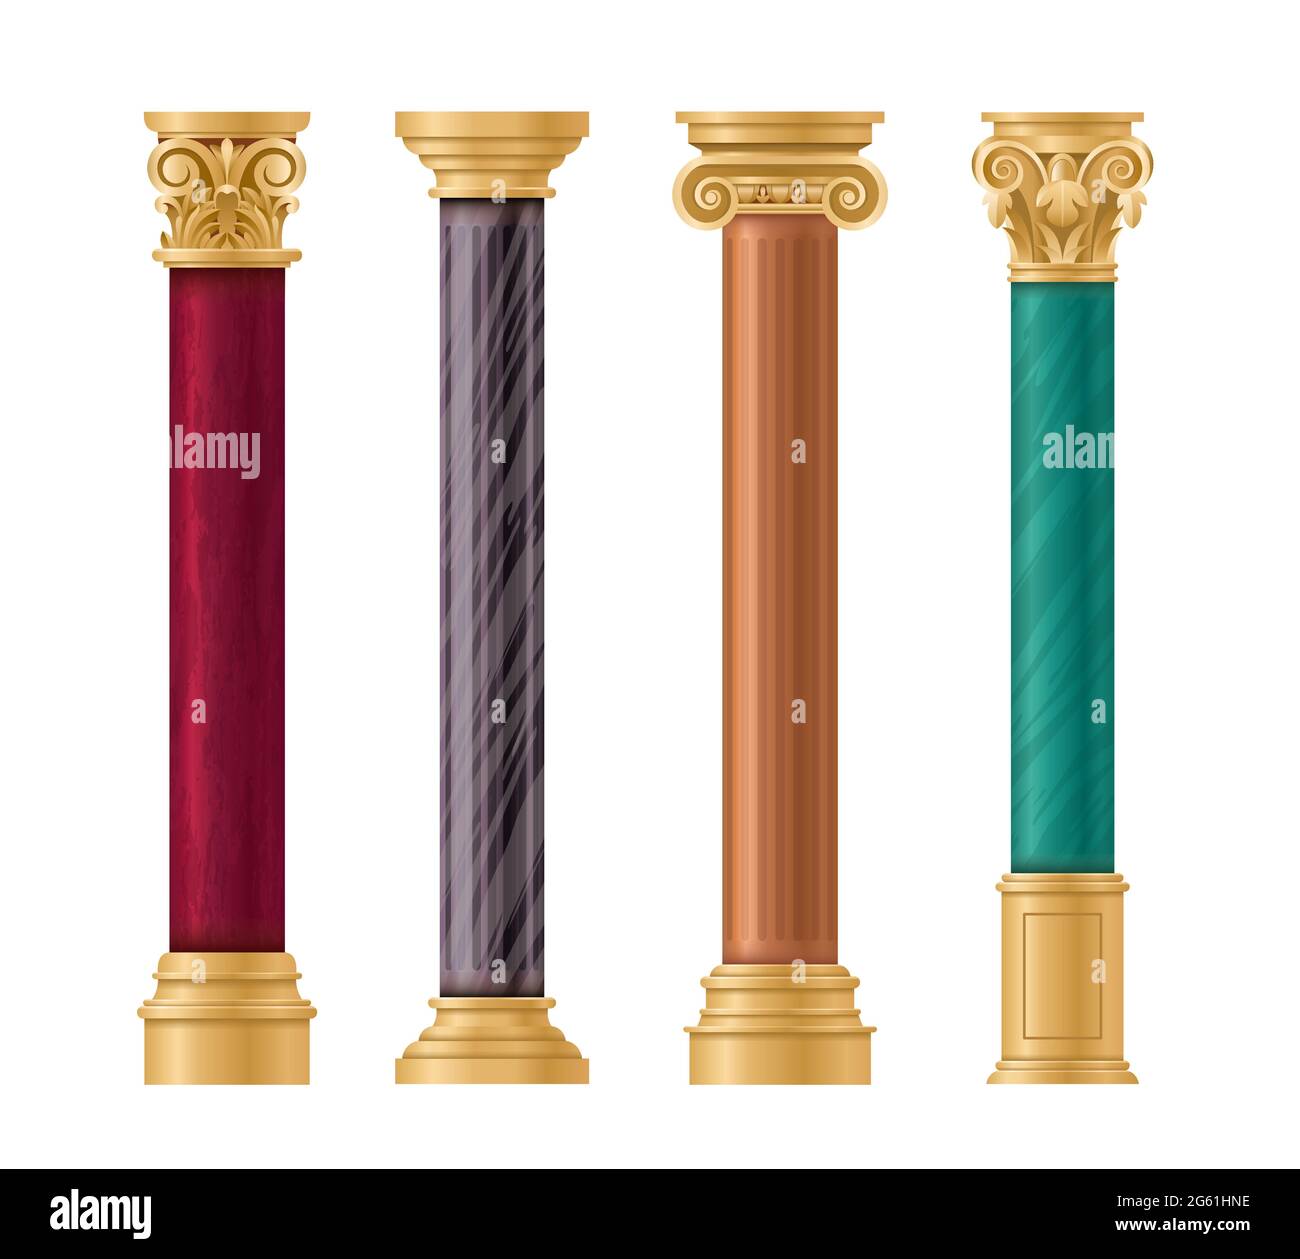 Pillars vector illustration set, cartoon flat classic marble columns with gold pillar decorations, in different styles and colors isolated on white Stock Vector